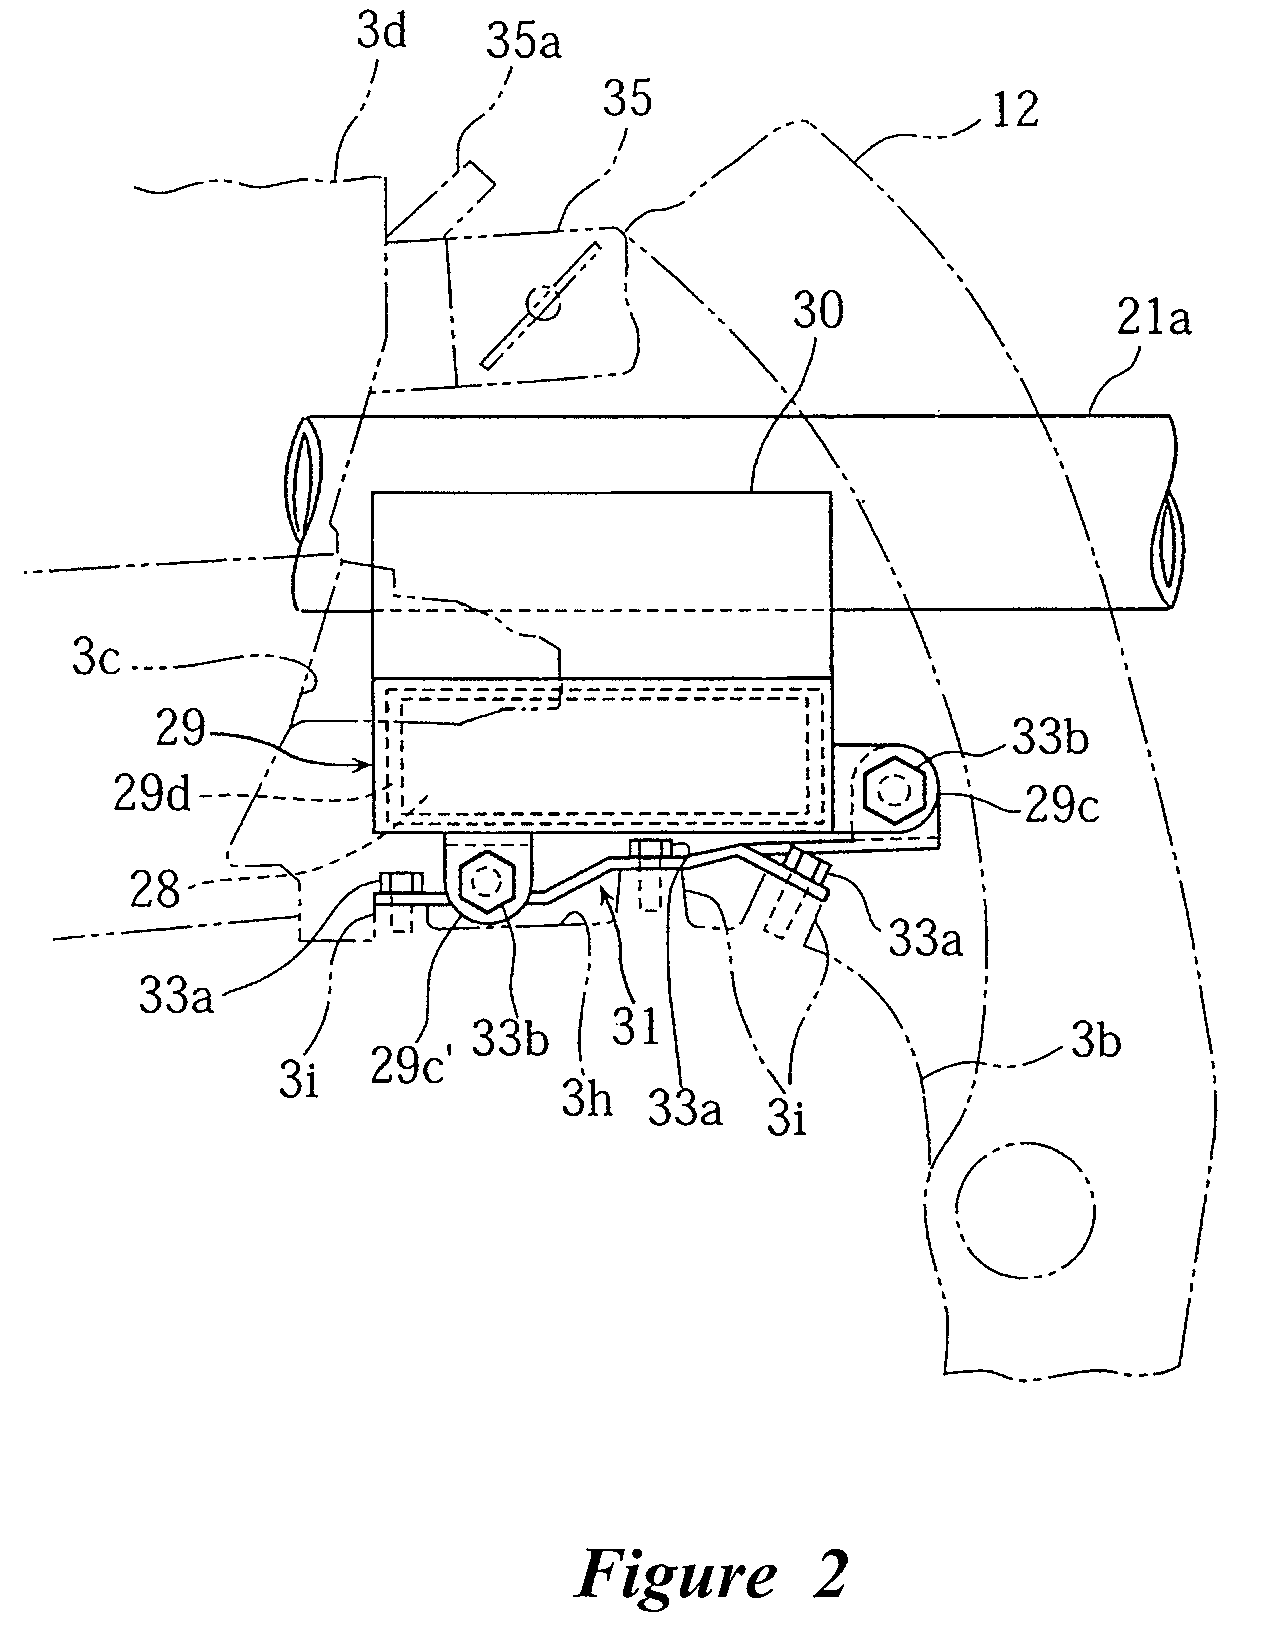 Motorcycle with battery mounting arrangement